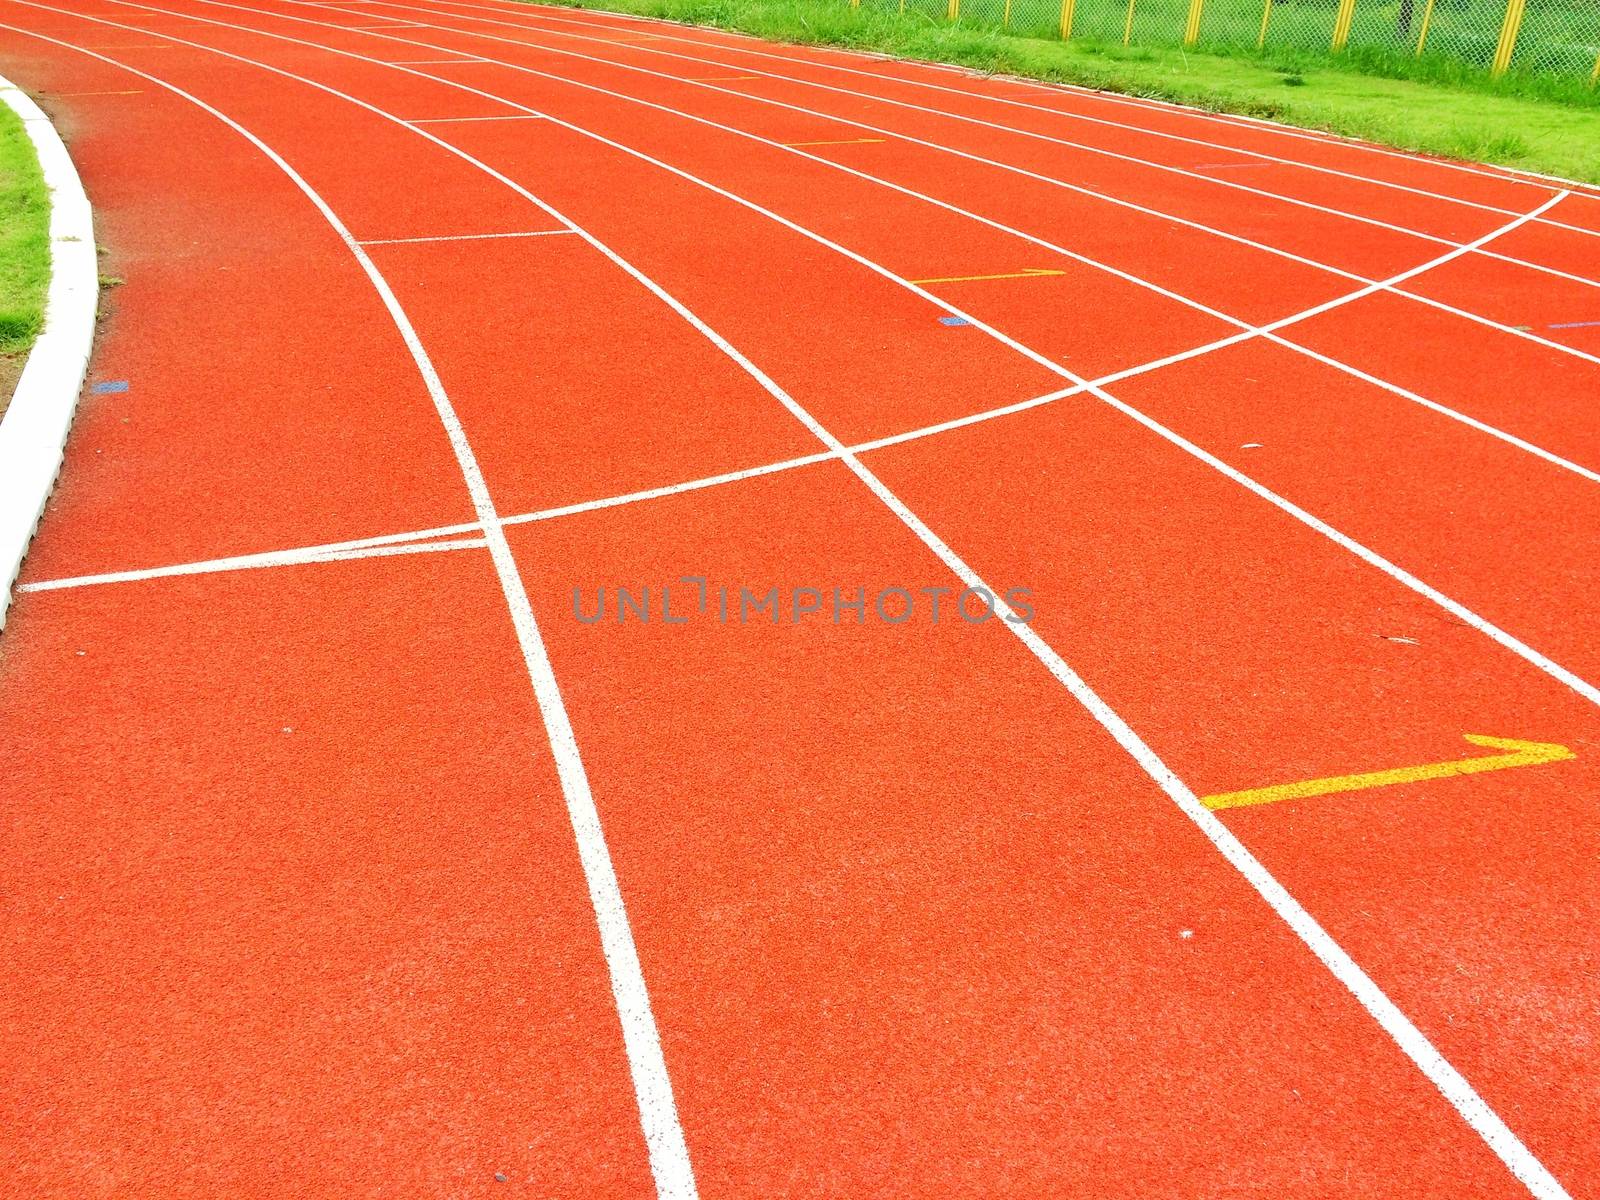 area start jogging track sport athletic by thattep